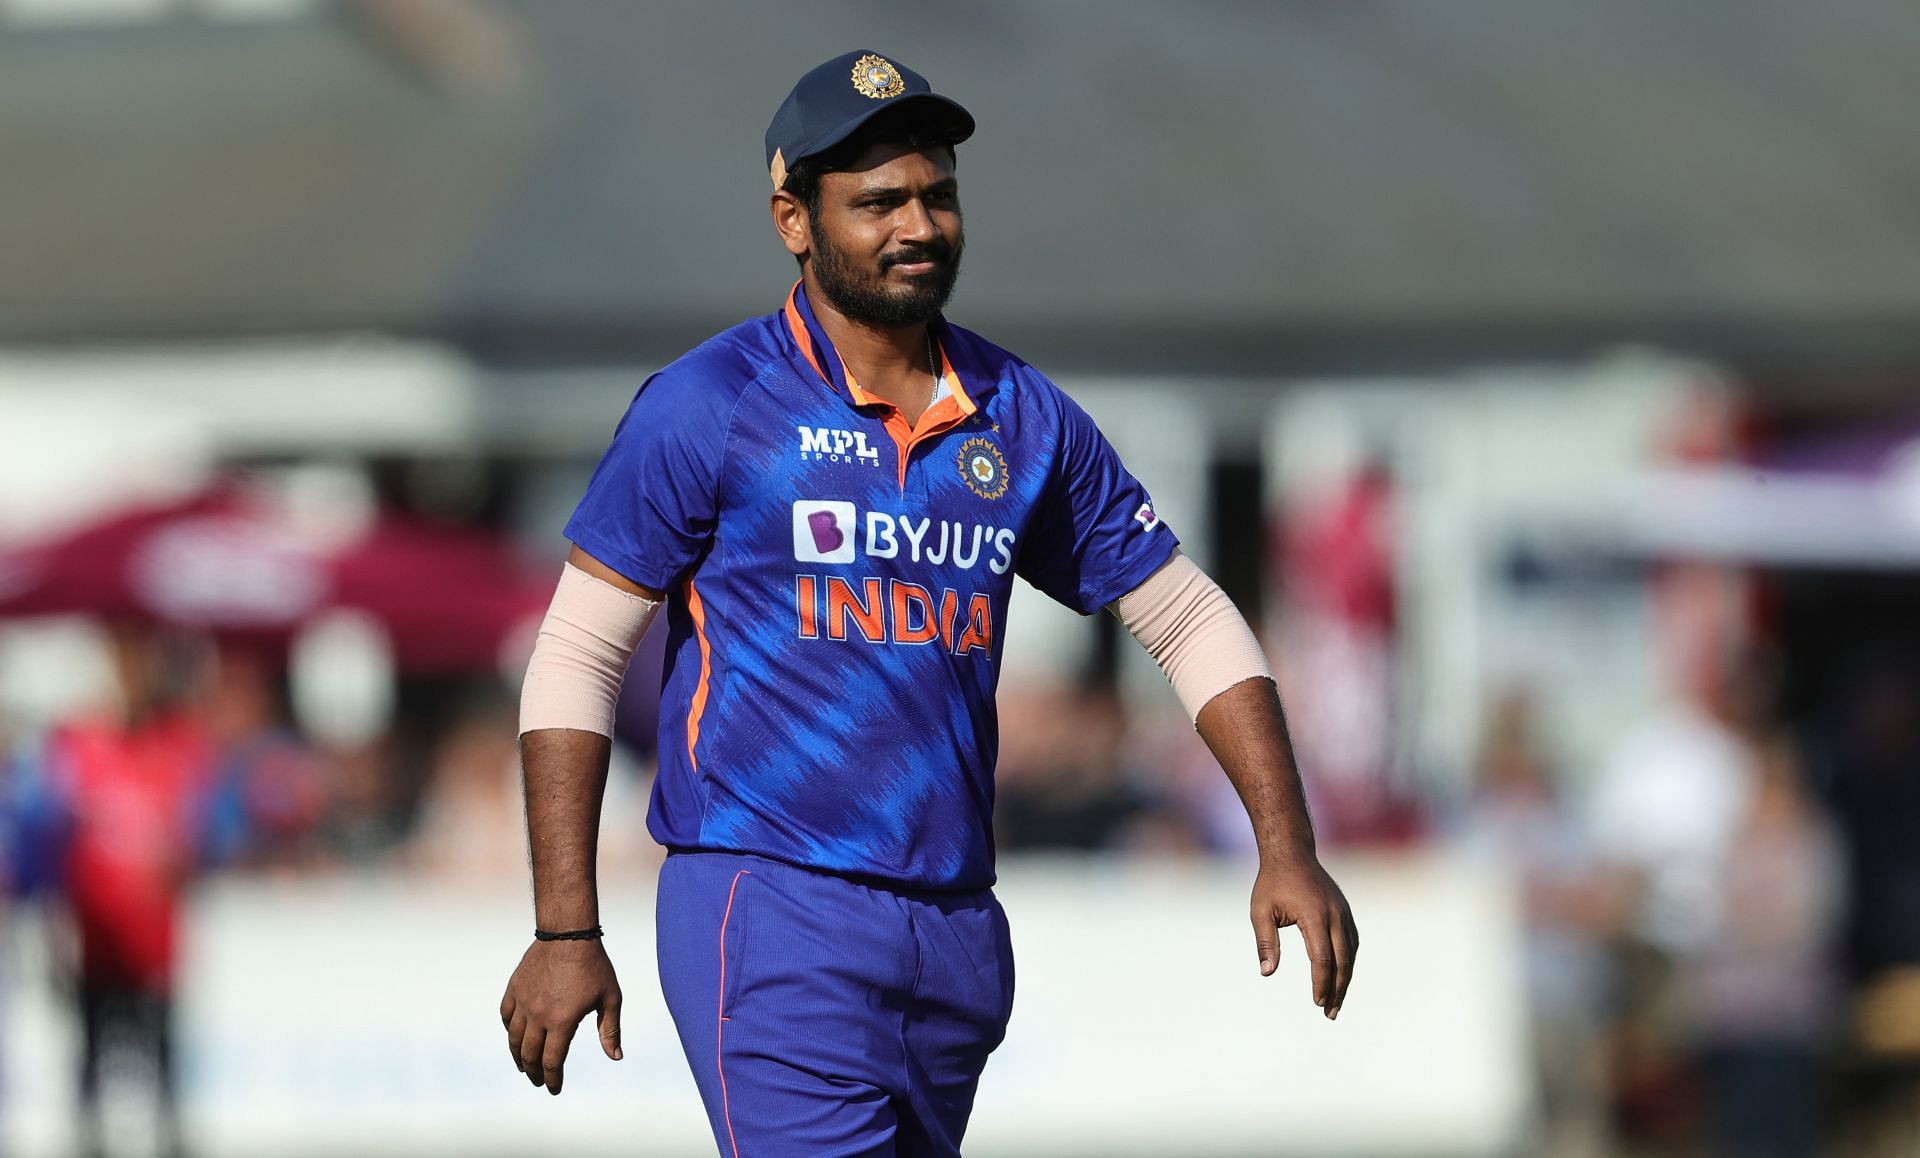 It's a request to him – he has to start performing in first-class matches"  - Sreesanth urges Sanju Samson to pile up runs in domestic cricket